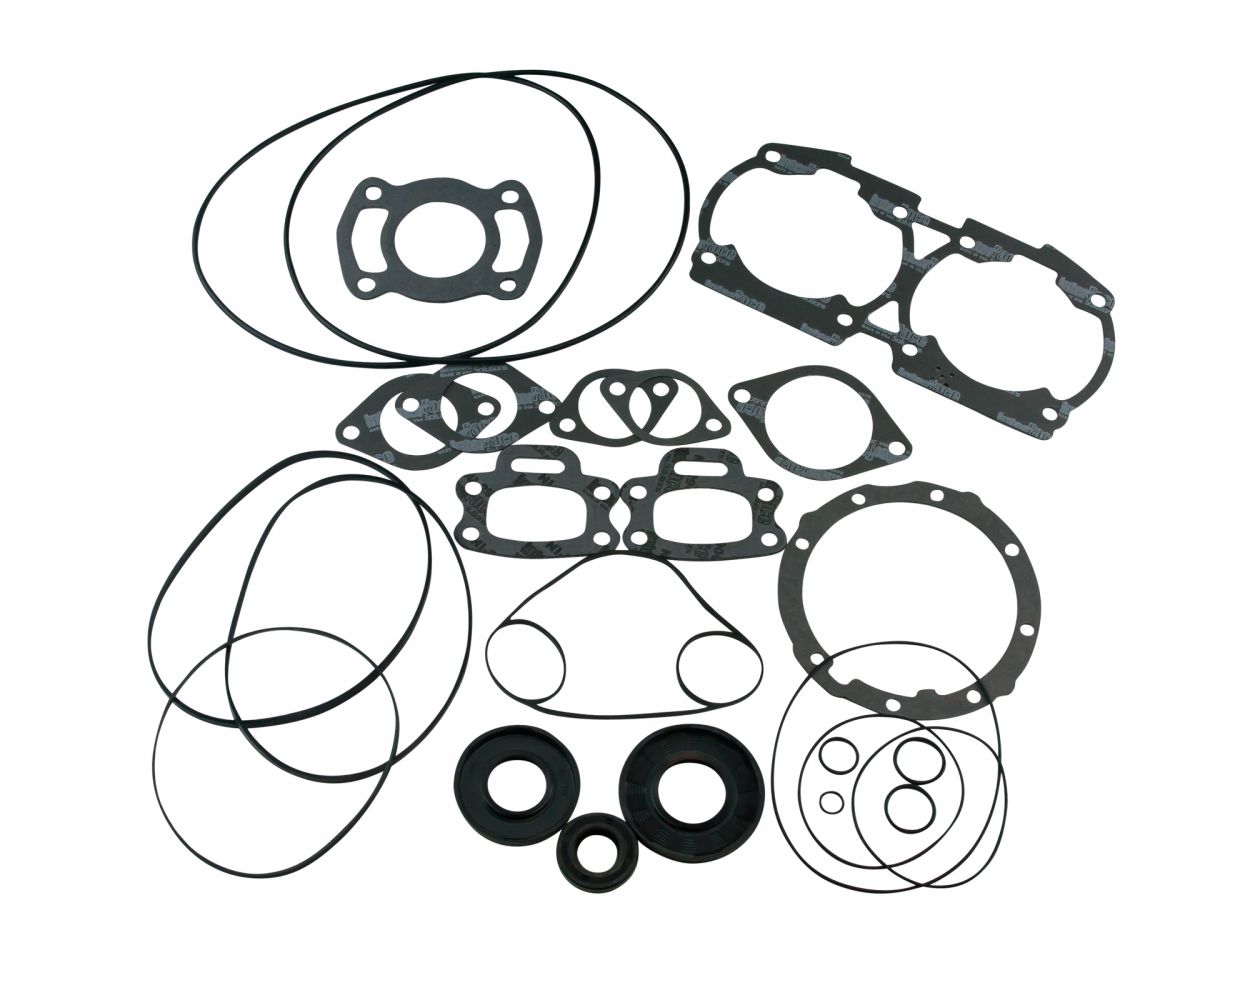 WSM PWC Top End Gasket Kit For Sea-Doo 720 SPX GTI HX GS GTS ALL 007-623-01 